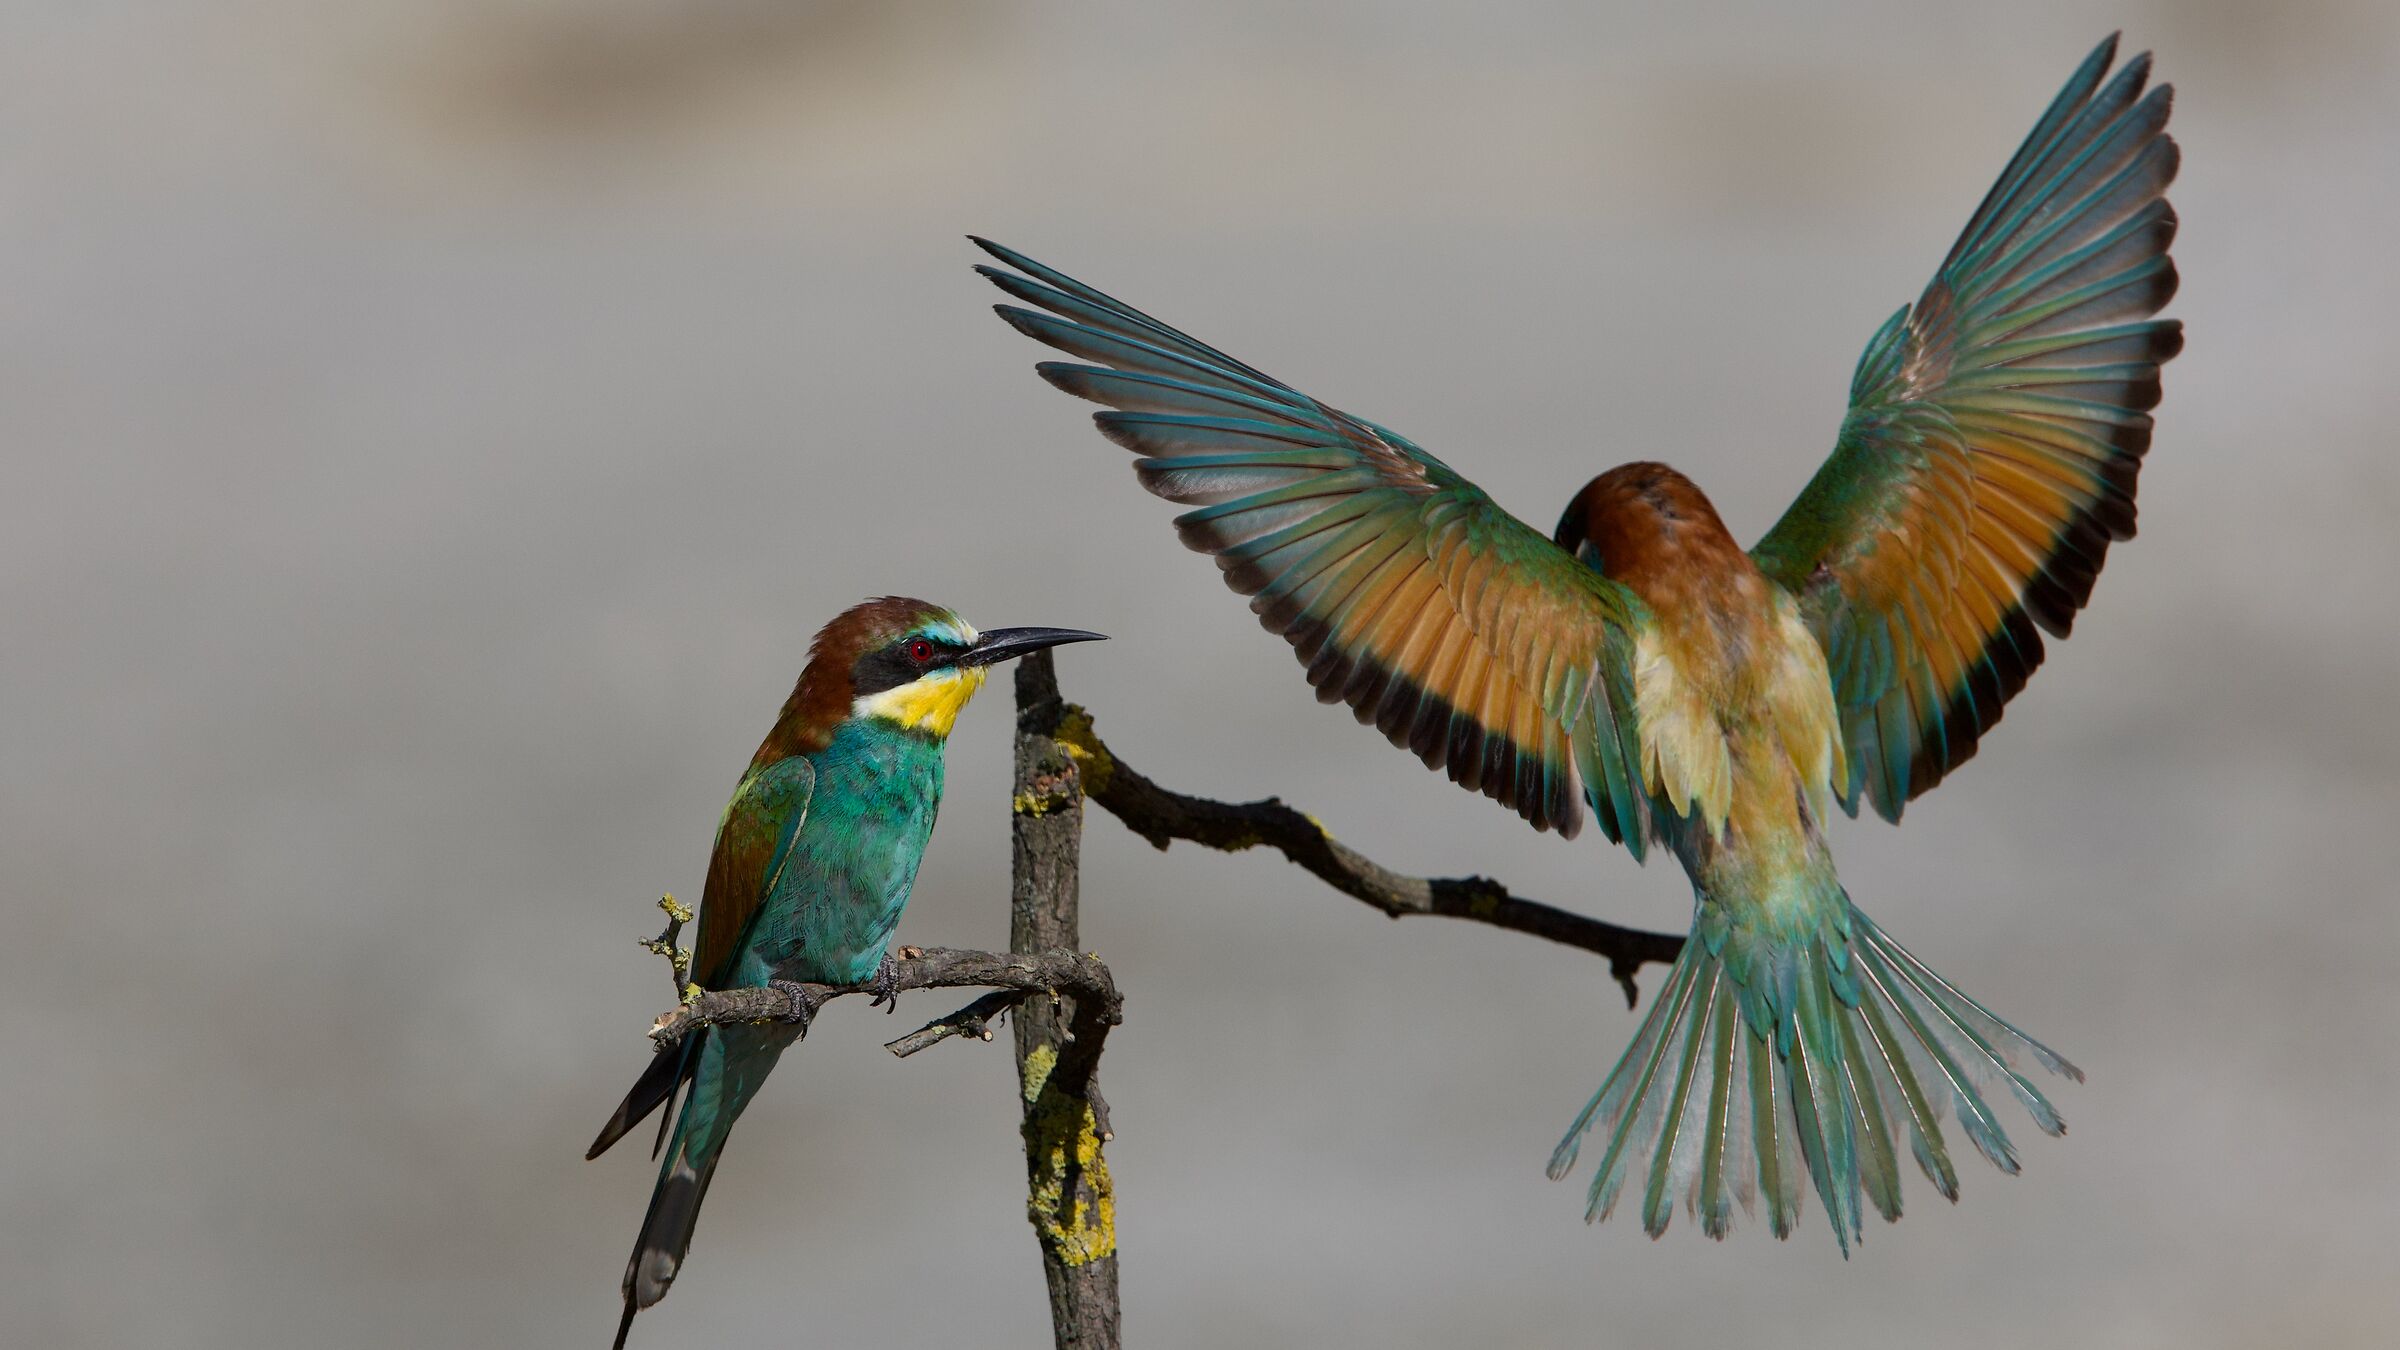 With the bee eater, you fly...